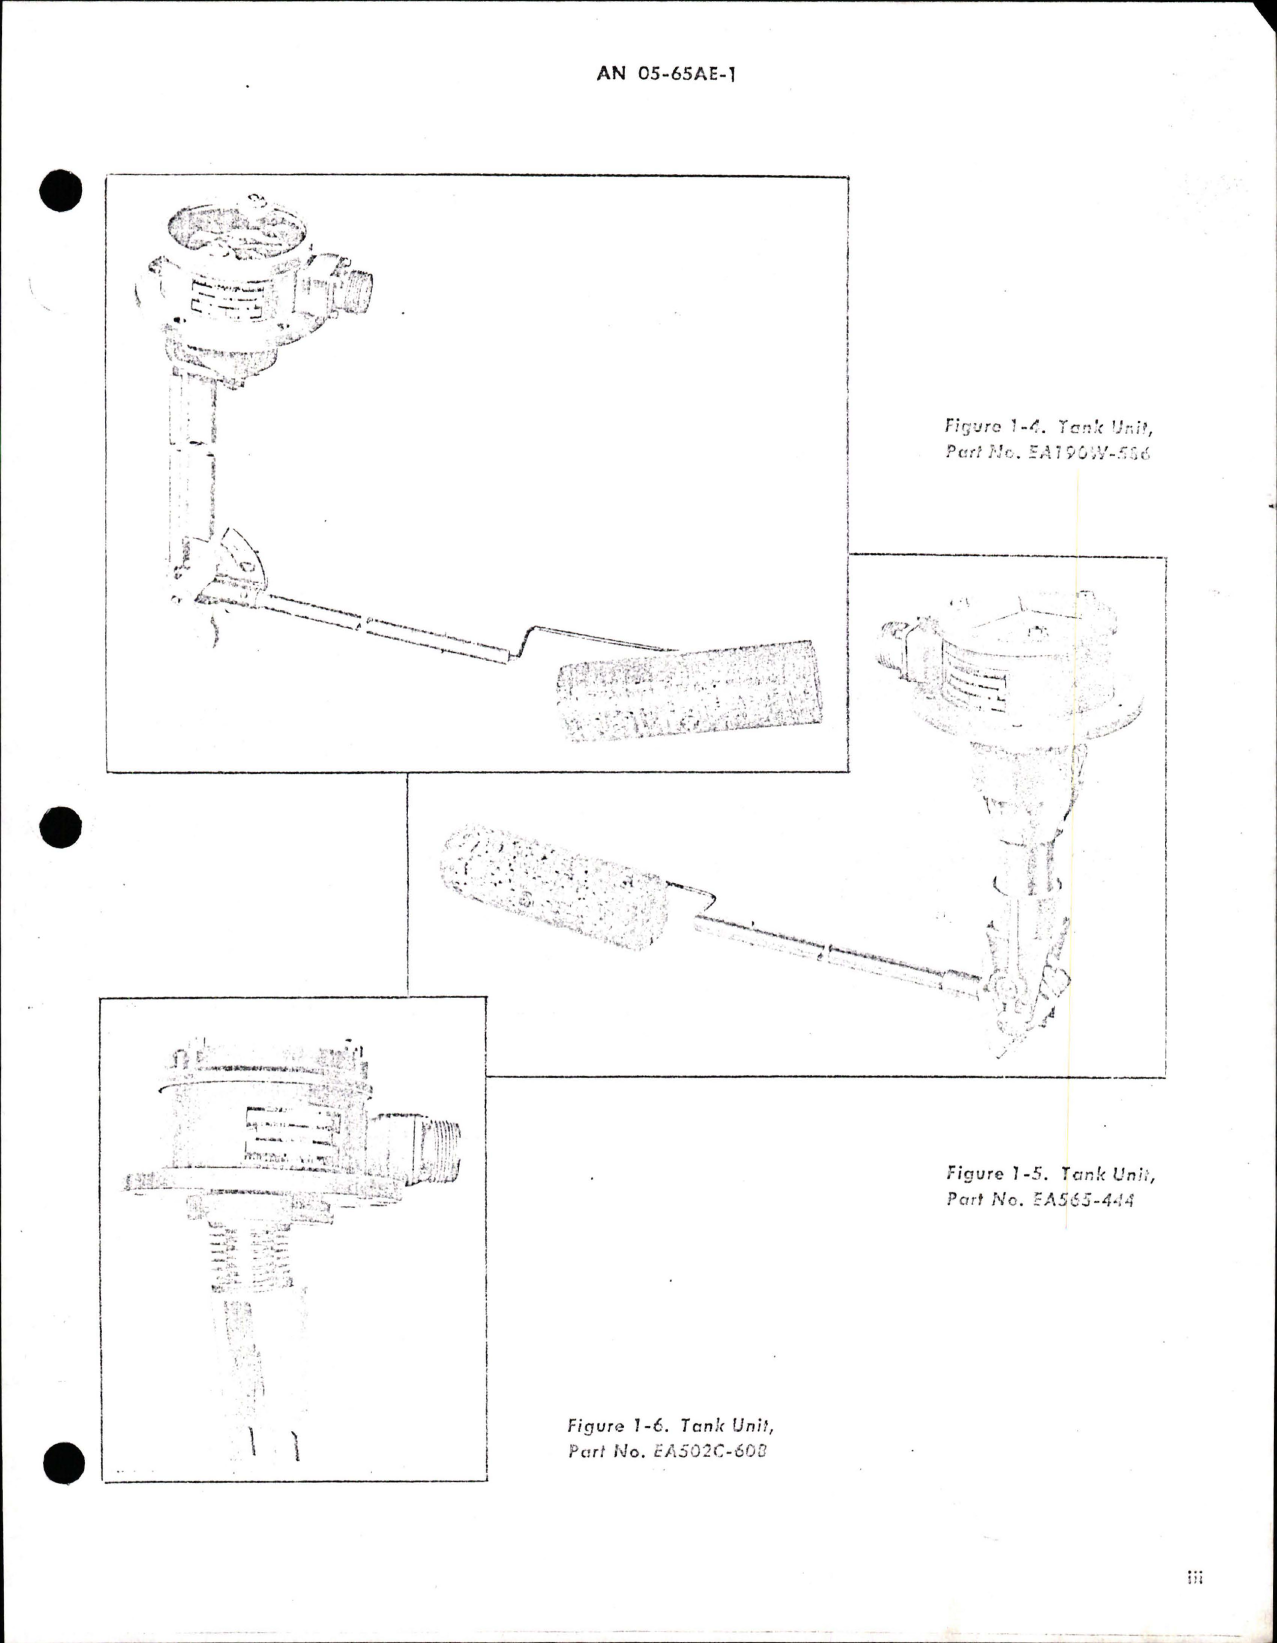 Sample page 5 from AirCorps Library document: Overhaul Manual for Tank Units